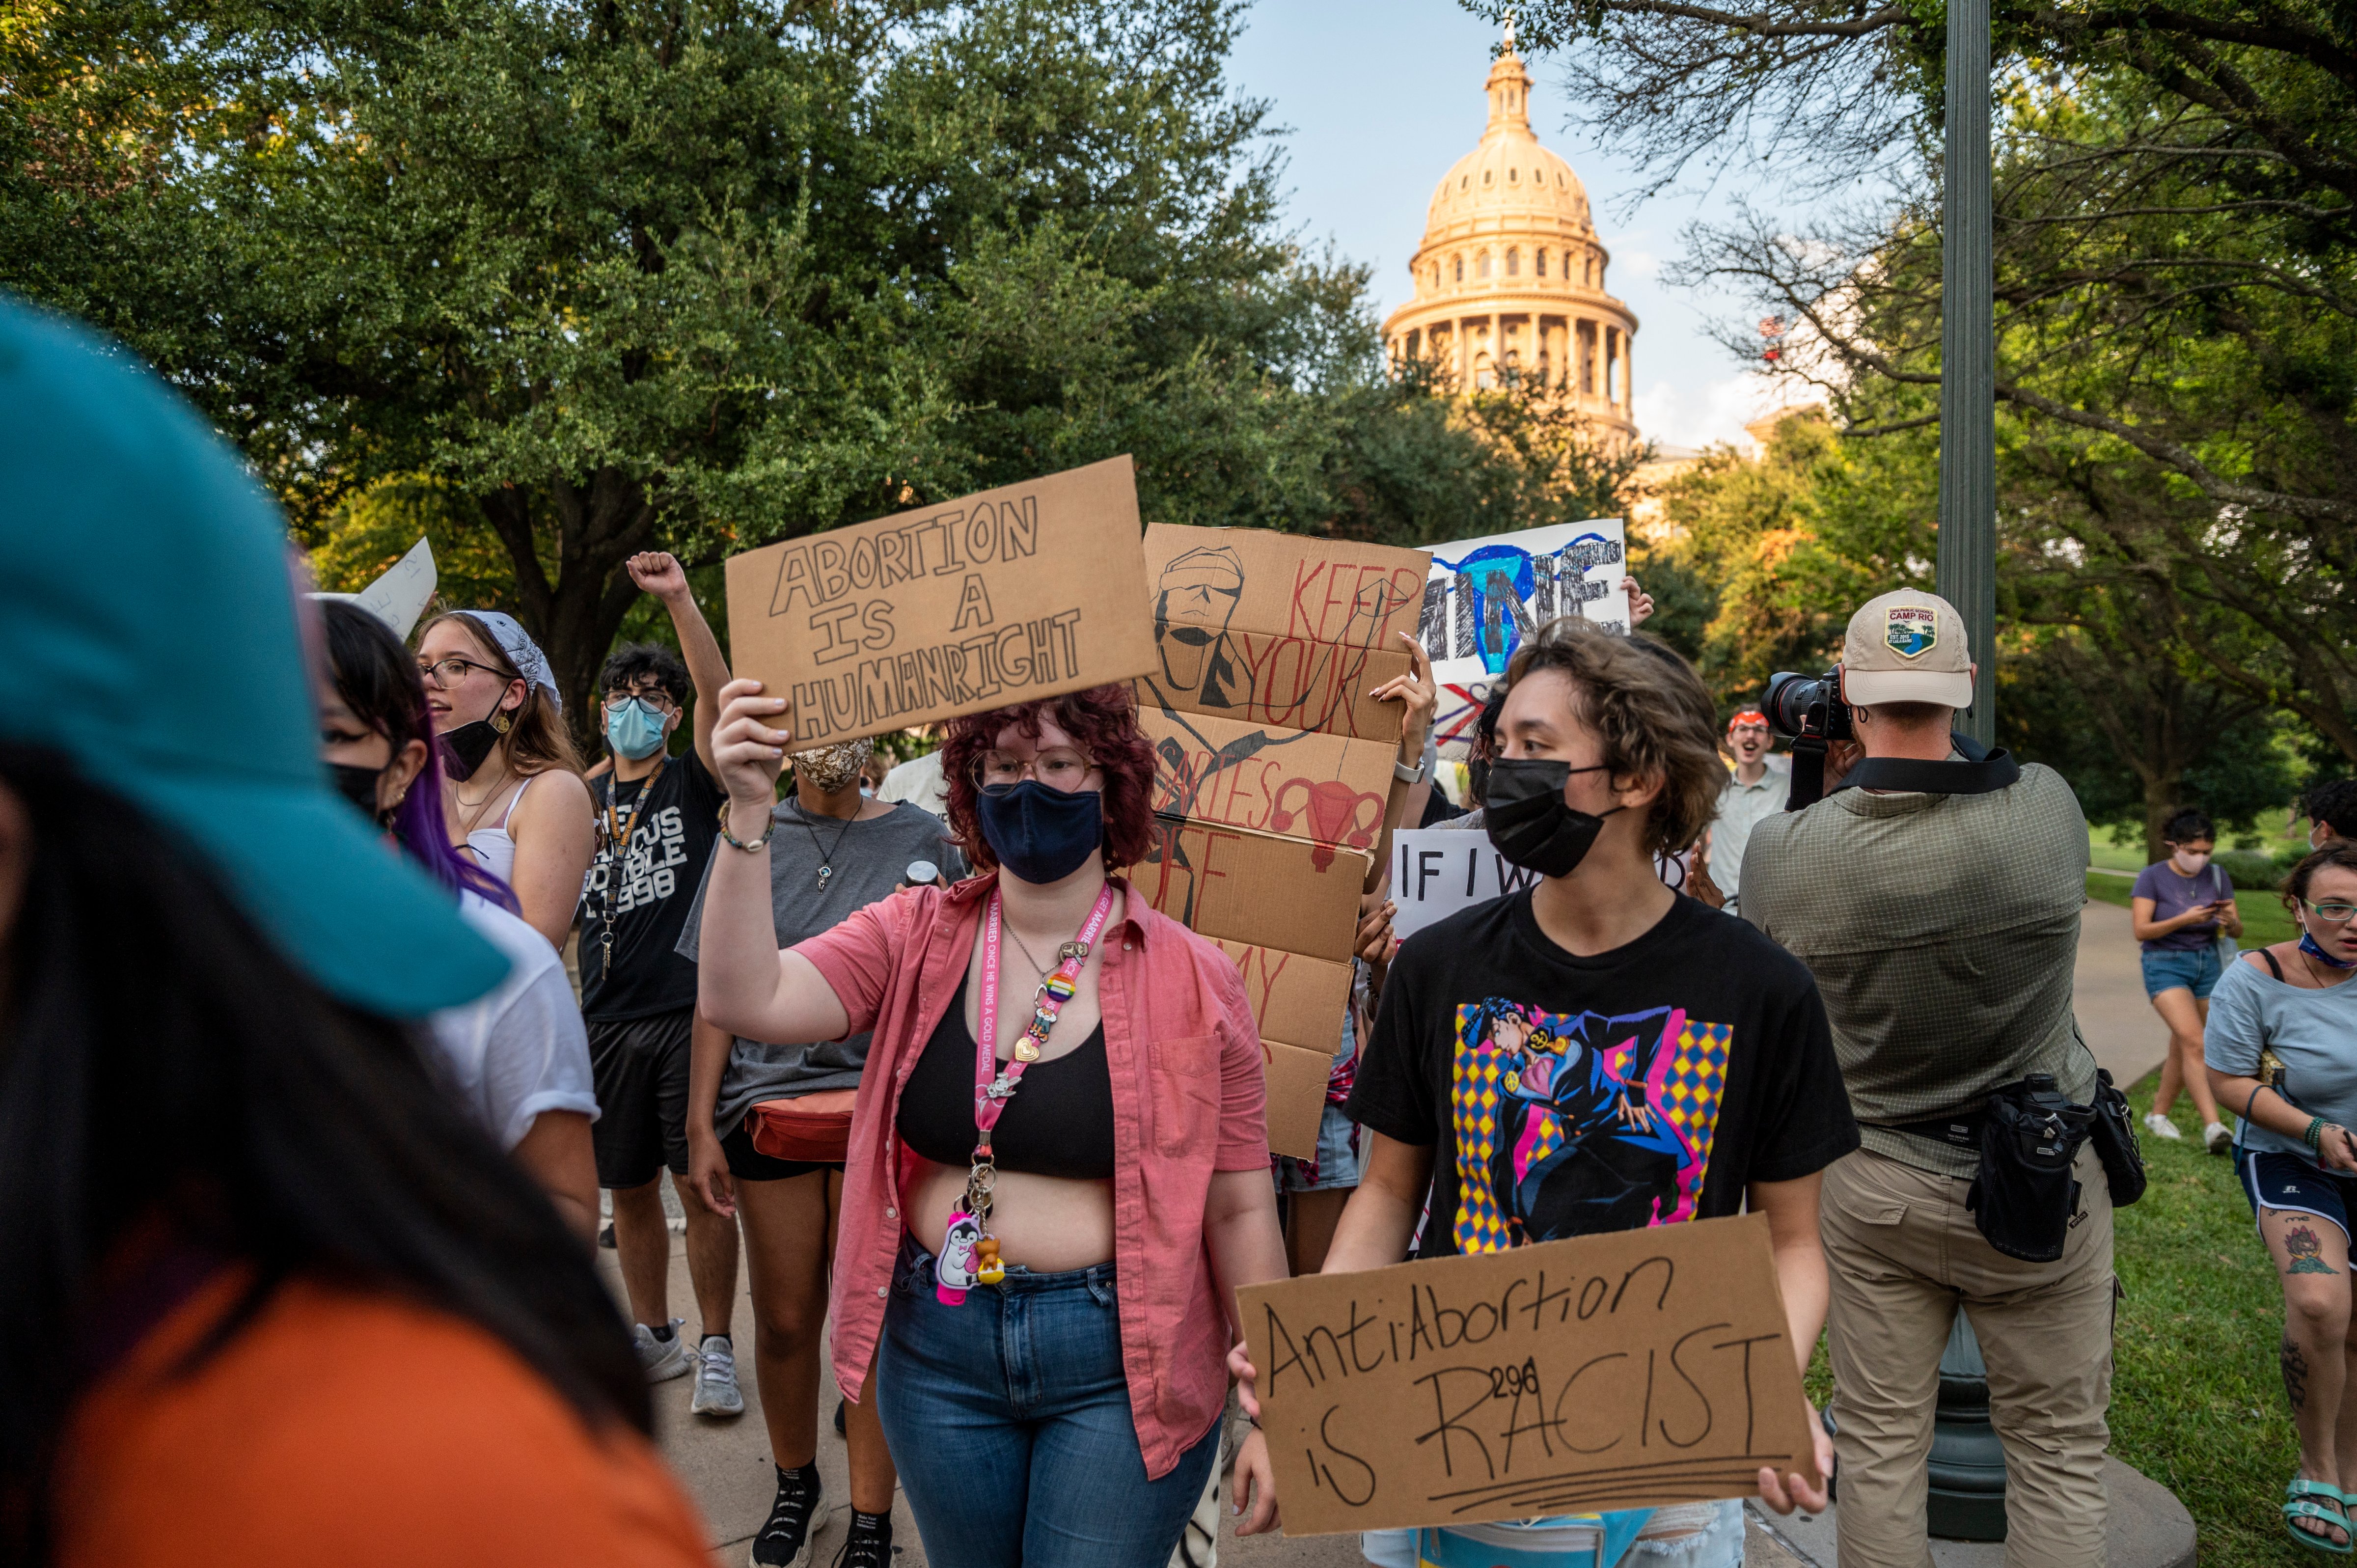 Abortion rights protesters march outside the Texas State Capitol in Austin on Sept. 1. Texas passed S.B. 8, which bans nearly all abortions and it went into effect Sept. 1. (Sergio Flores—The Washington Post/Getty Images)